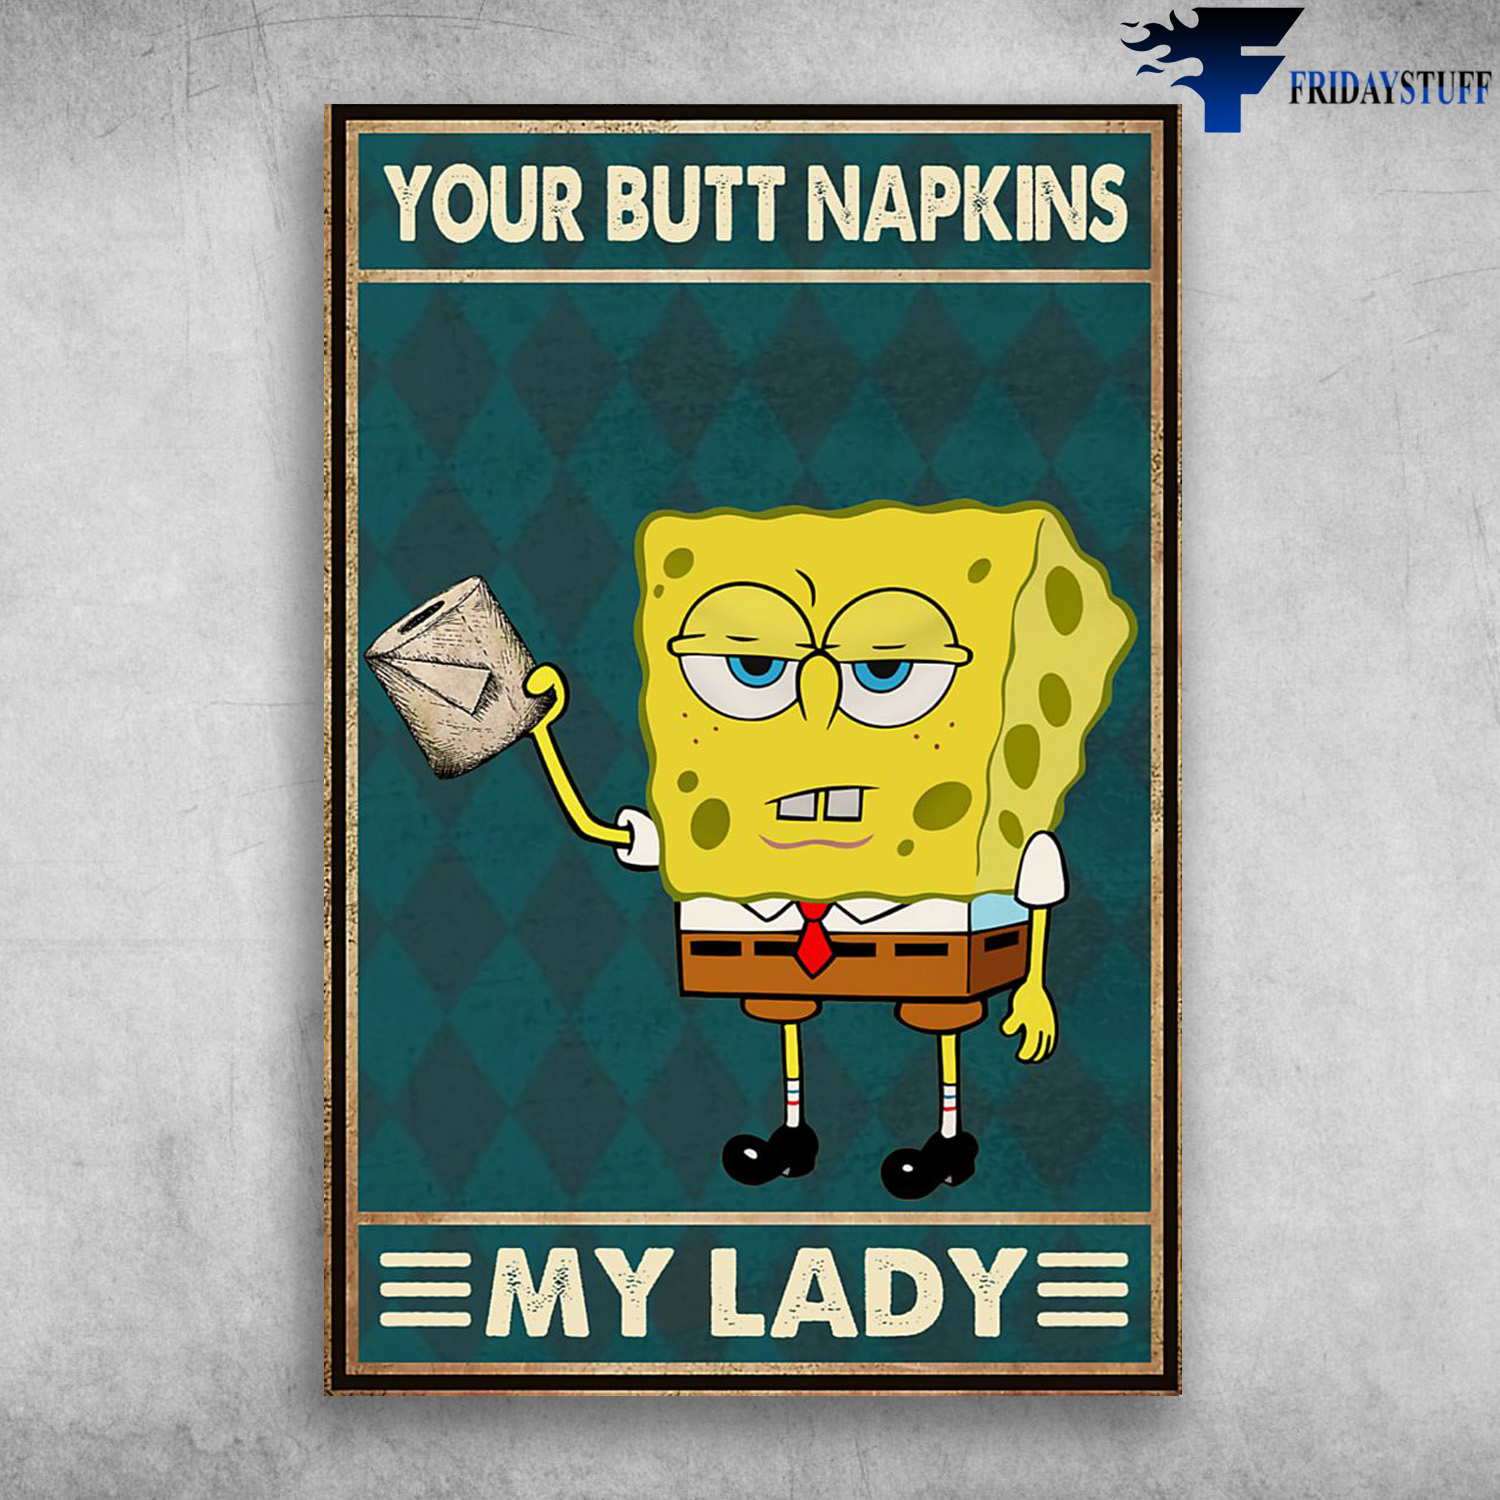 Spongebob With Toilet Paper Roll - Your Butt Napkins, My Lady